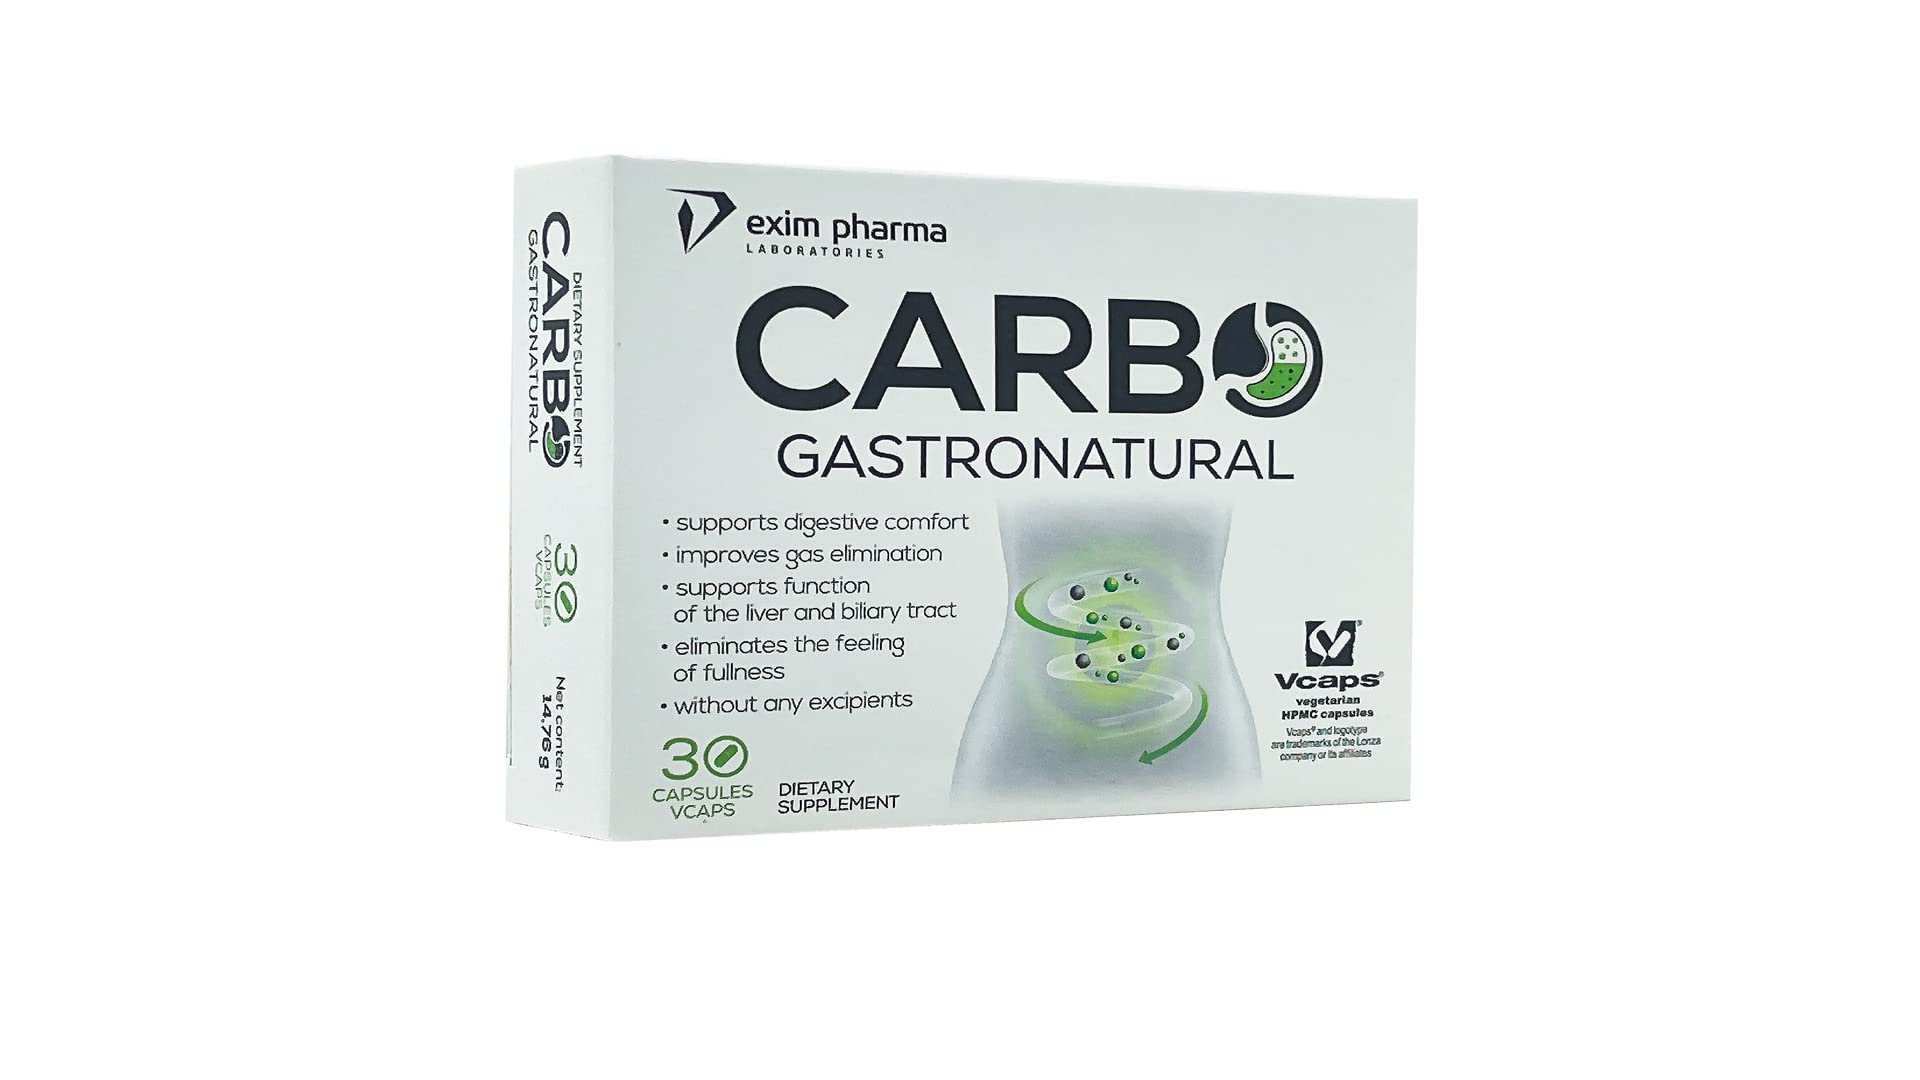 Carbo gastronatural support digestive comfort with activated charcoal, fennel and anise extracts,vegetarian capsules helps gas elimination,relief bloating 30 capsules